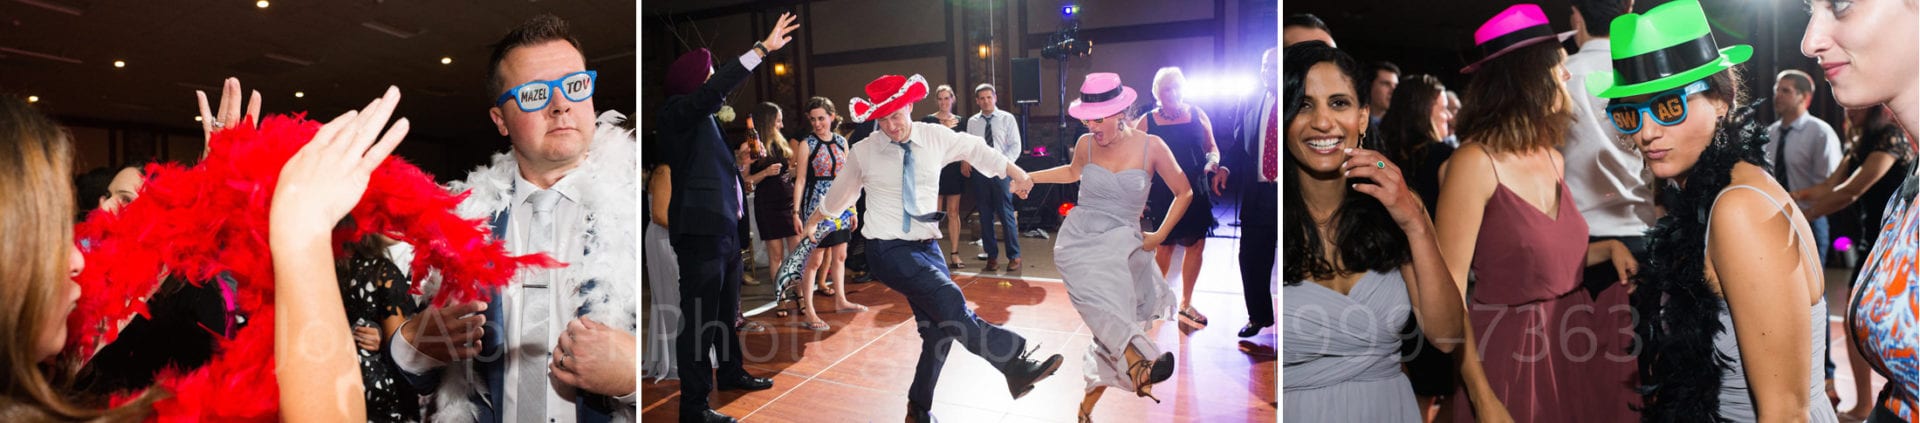 Wedding guests dancing with funny glasses and hats during a wedding reception.